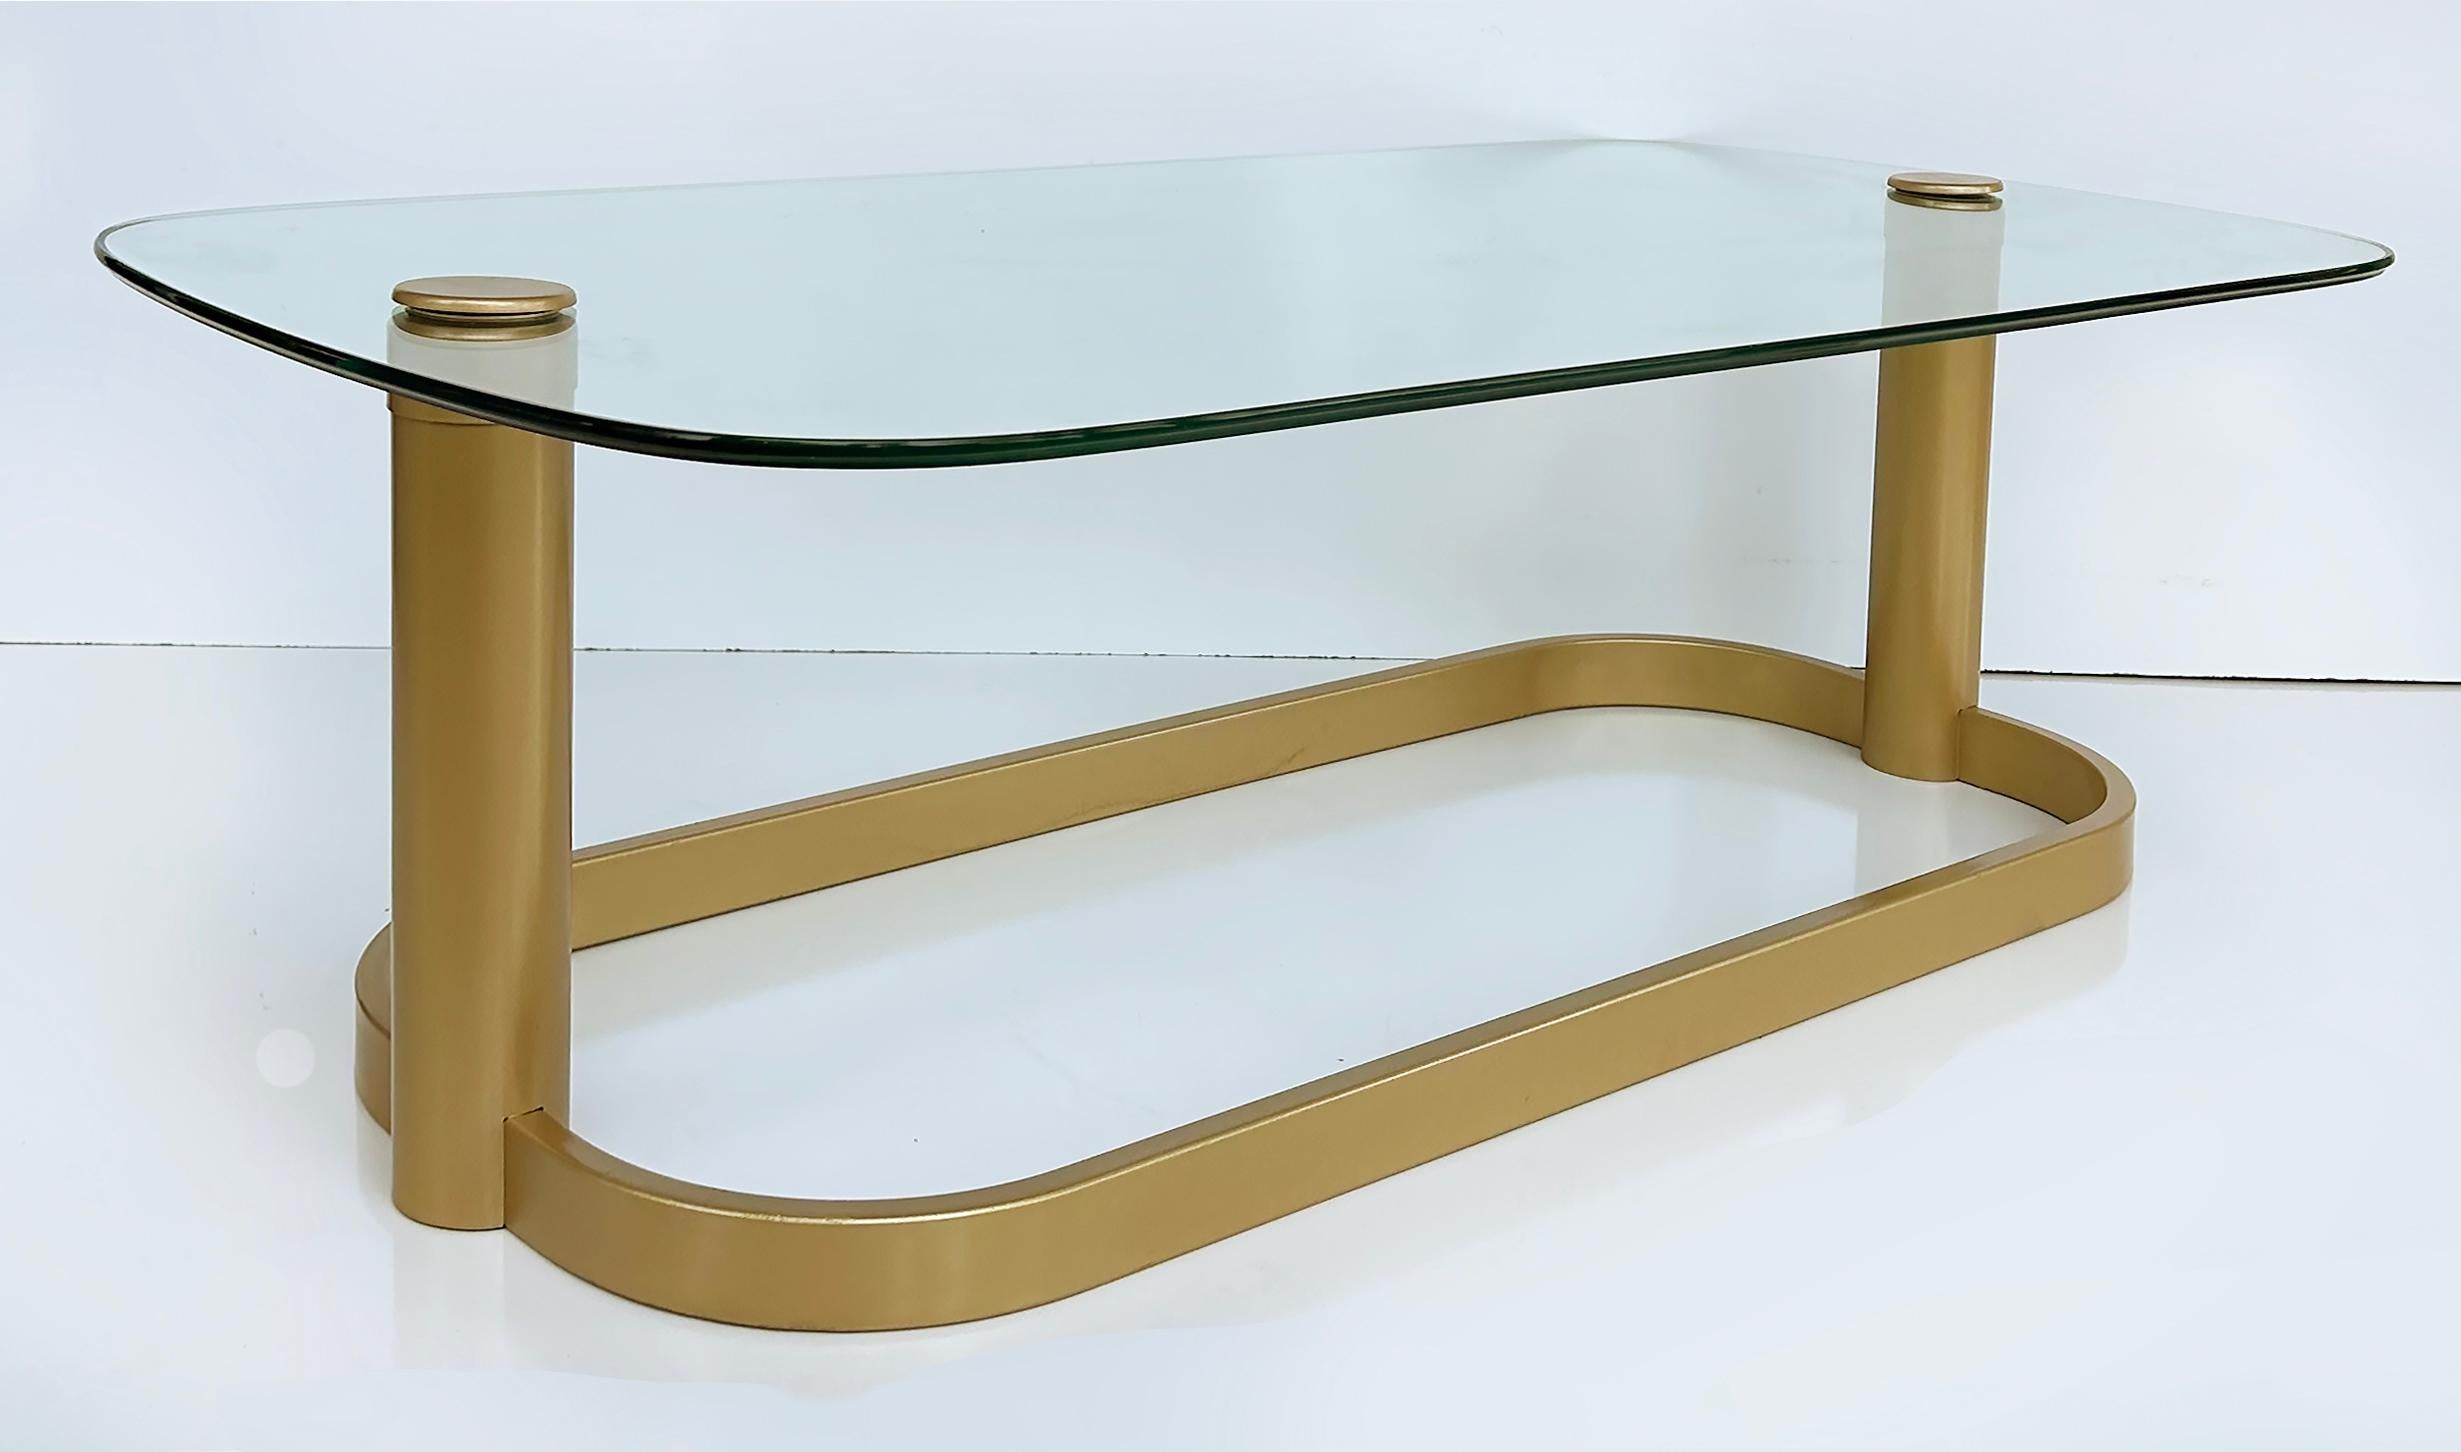 Vintage Modern Glass Top Coffee Table with Metal Base

Offered for sale is a 1980s vintage modern rectangular form glass top coffee table with rounded edges and a metal base. The base is painted gold. The top is secured to the base by matching gold